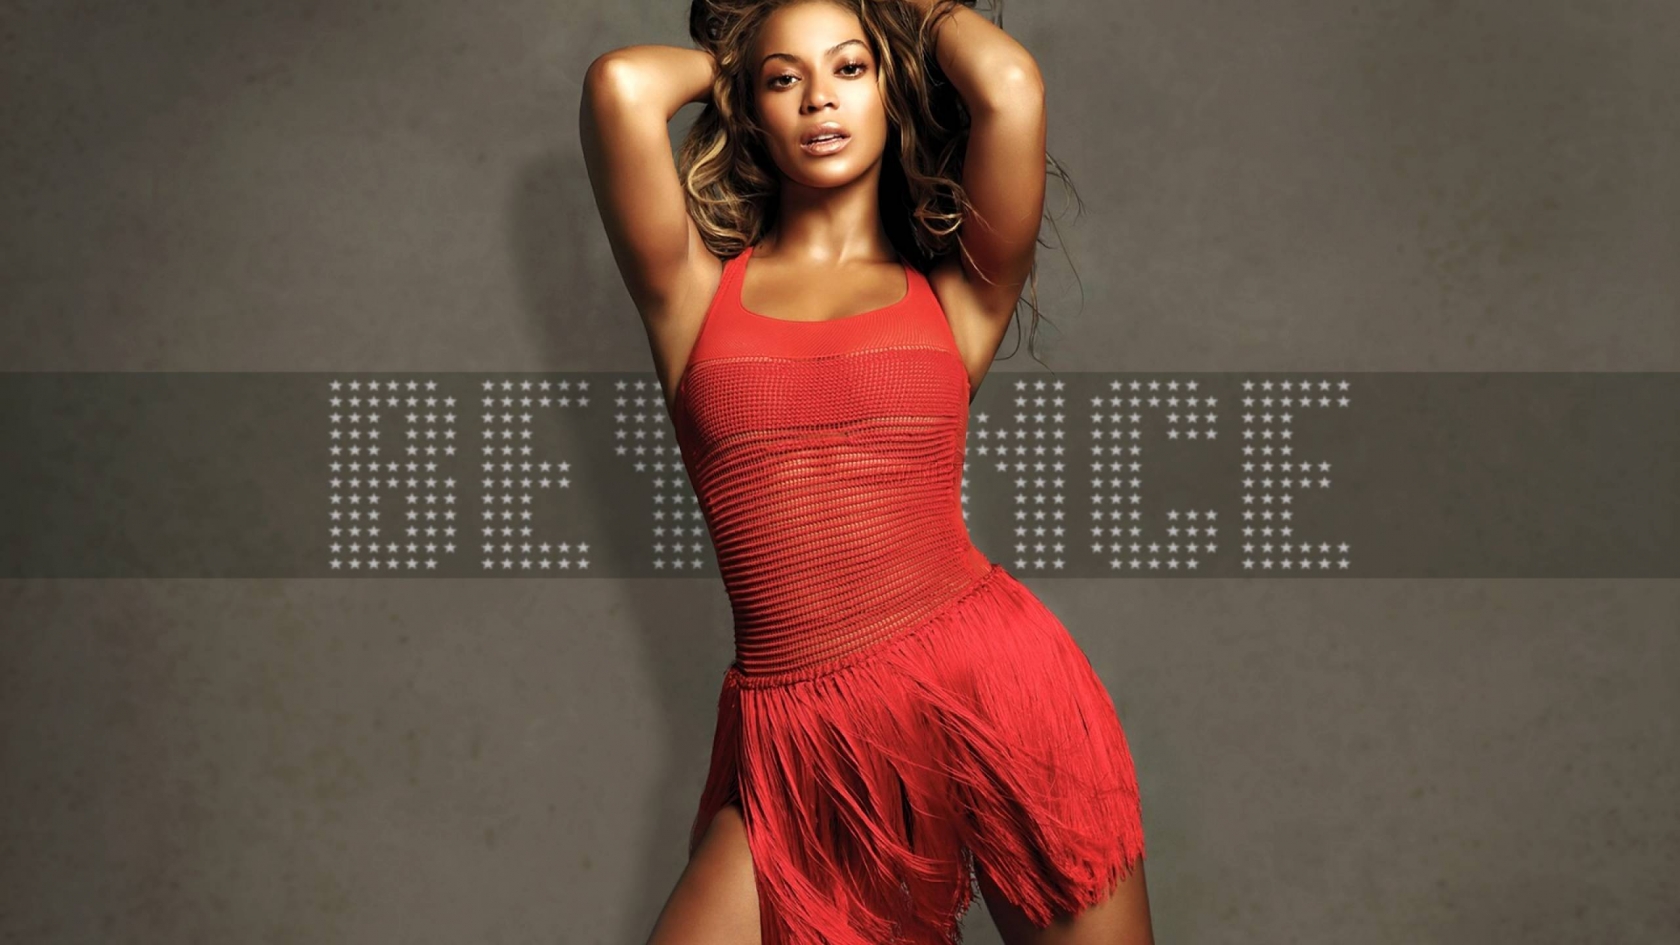 Beautiful Beyonce for 1680 x 945 HDTV resolution